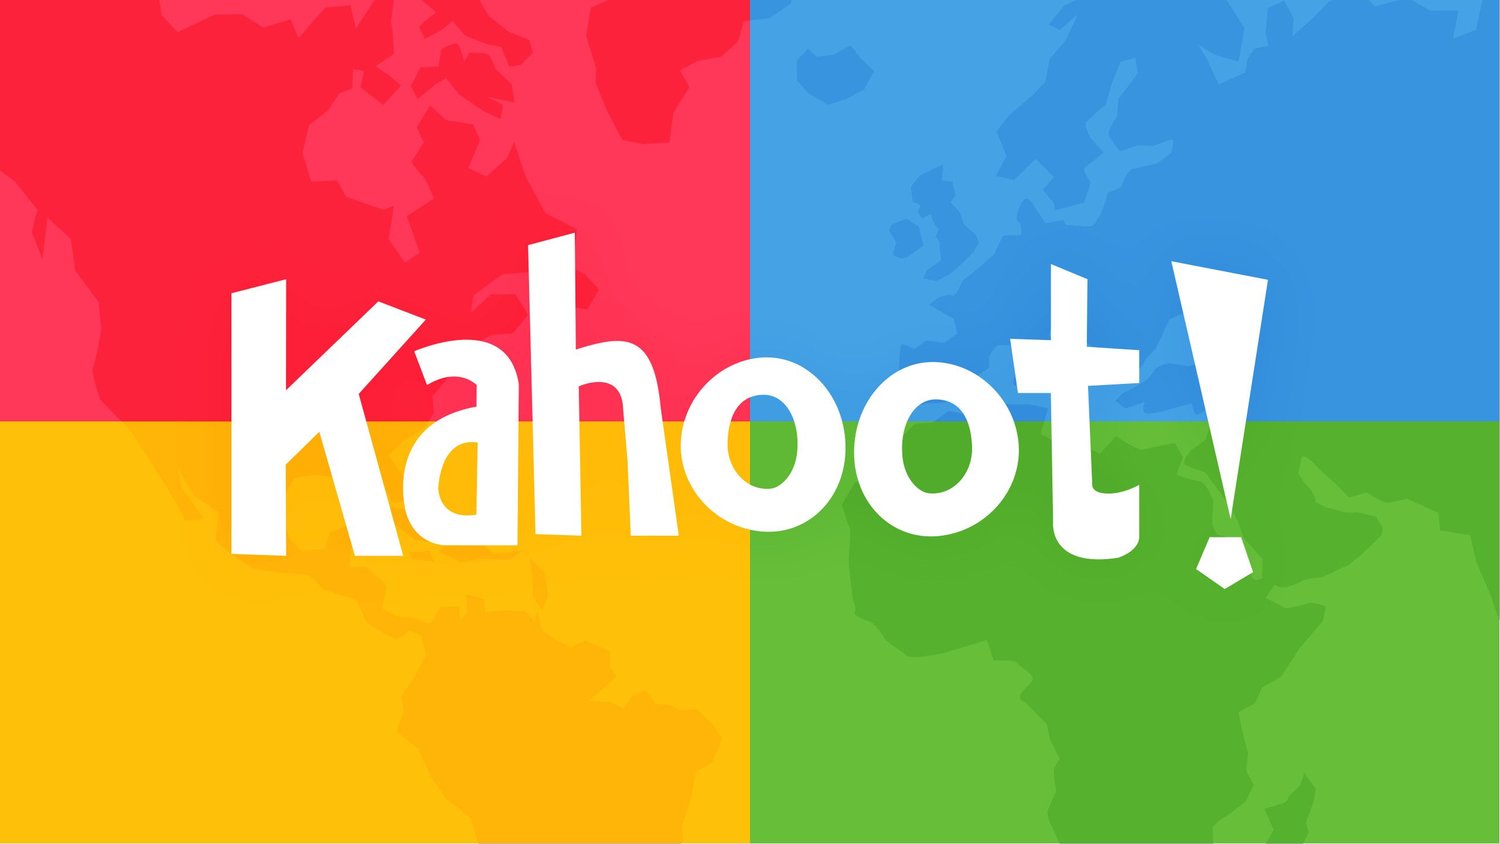 Image result for kahoot